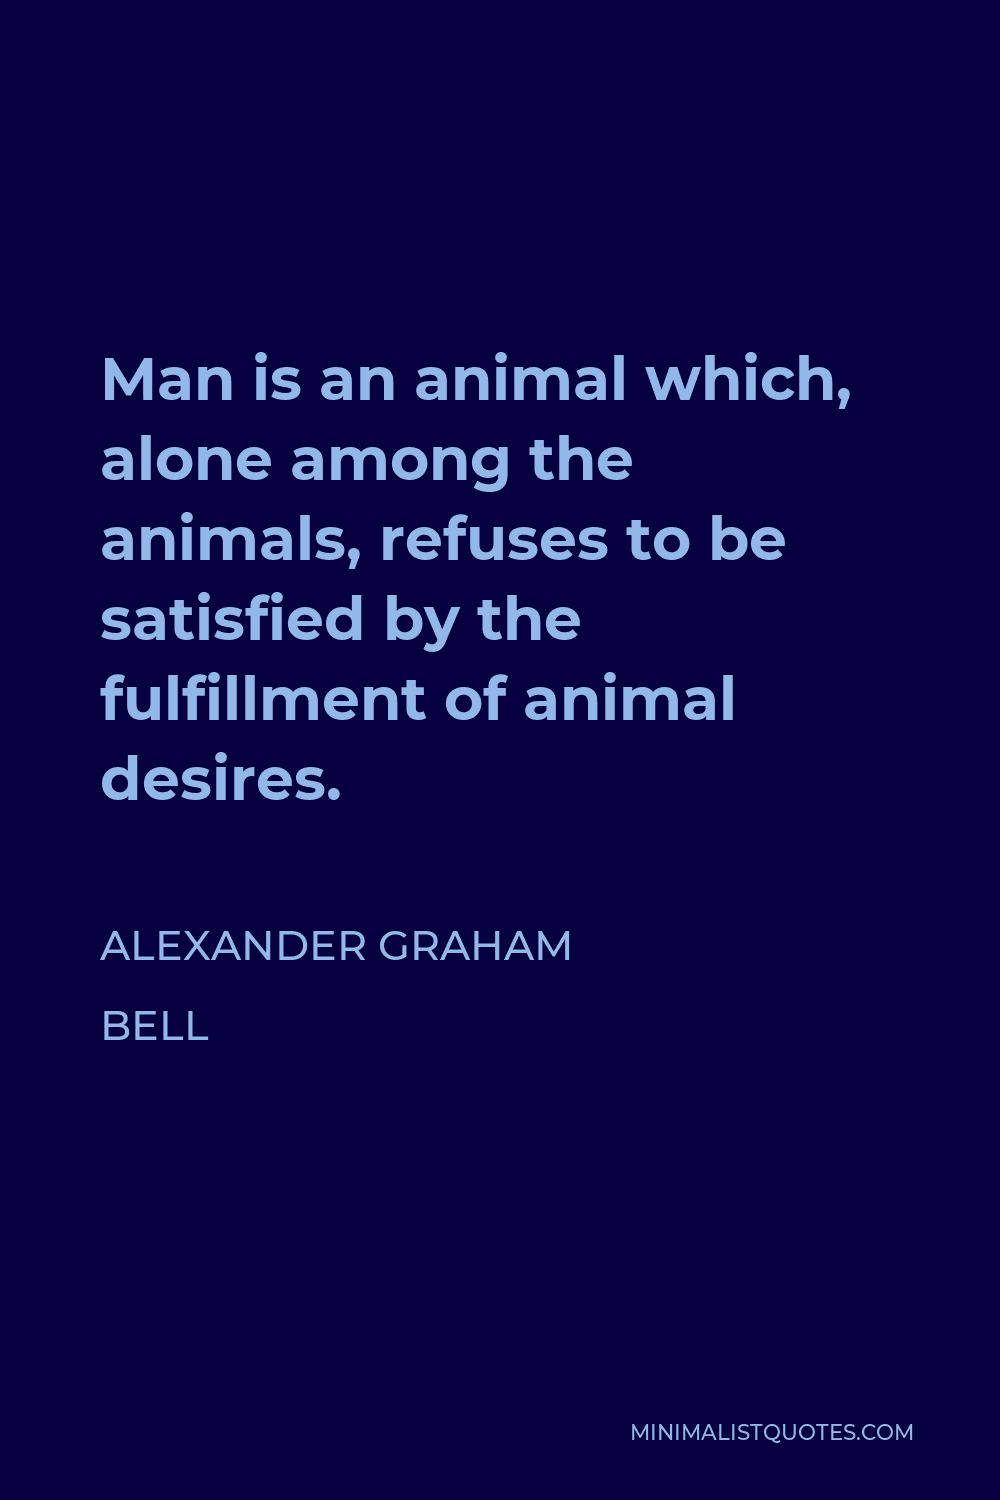 Alexander Graham Bell Quote - Man is an animal which, alone among the animals, refuses to be satisfied by the fulfillment of animal desires.